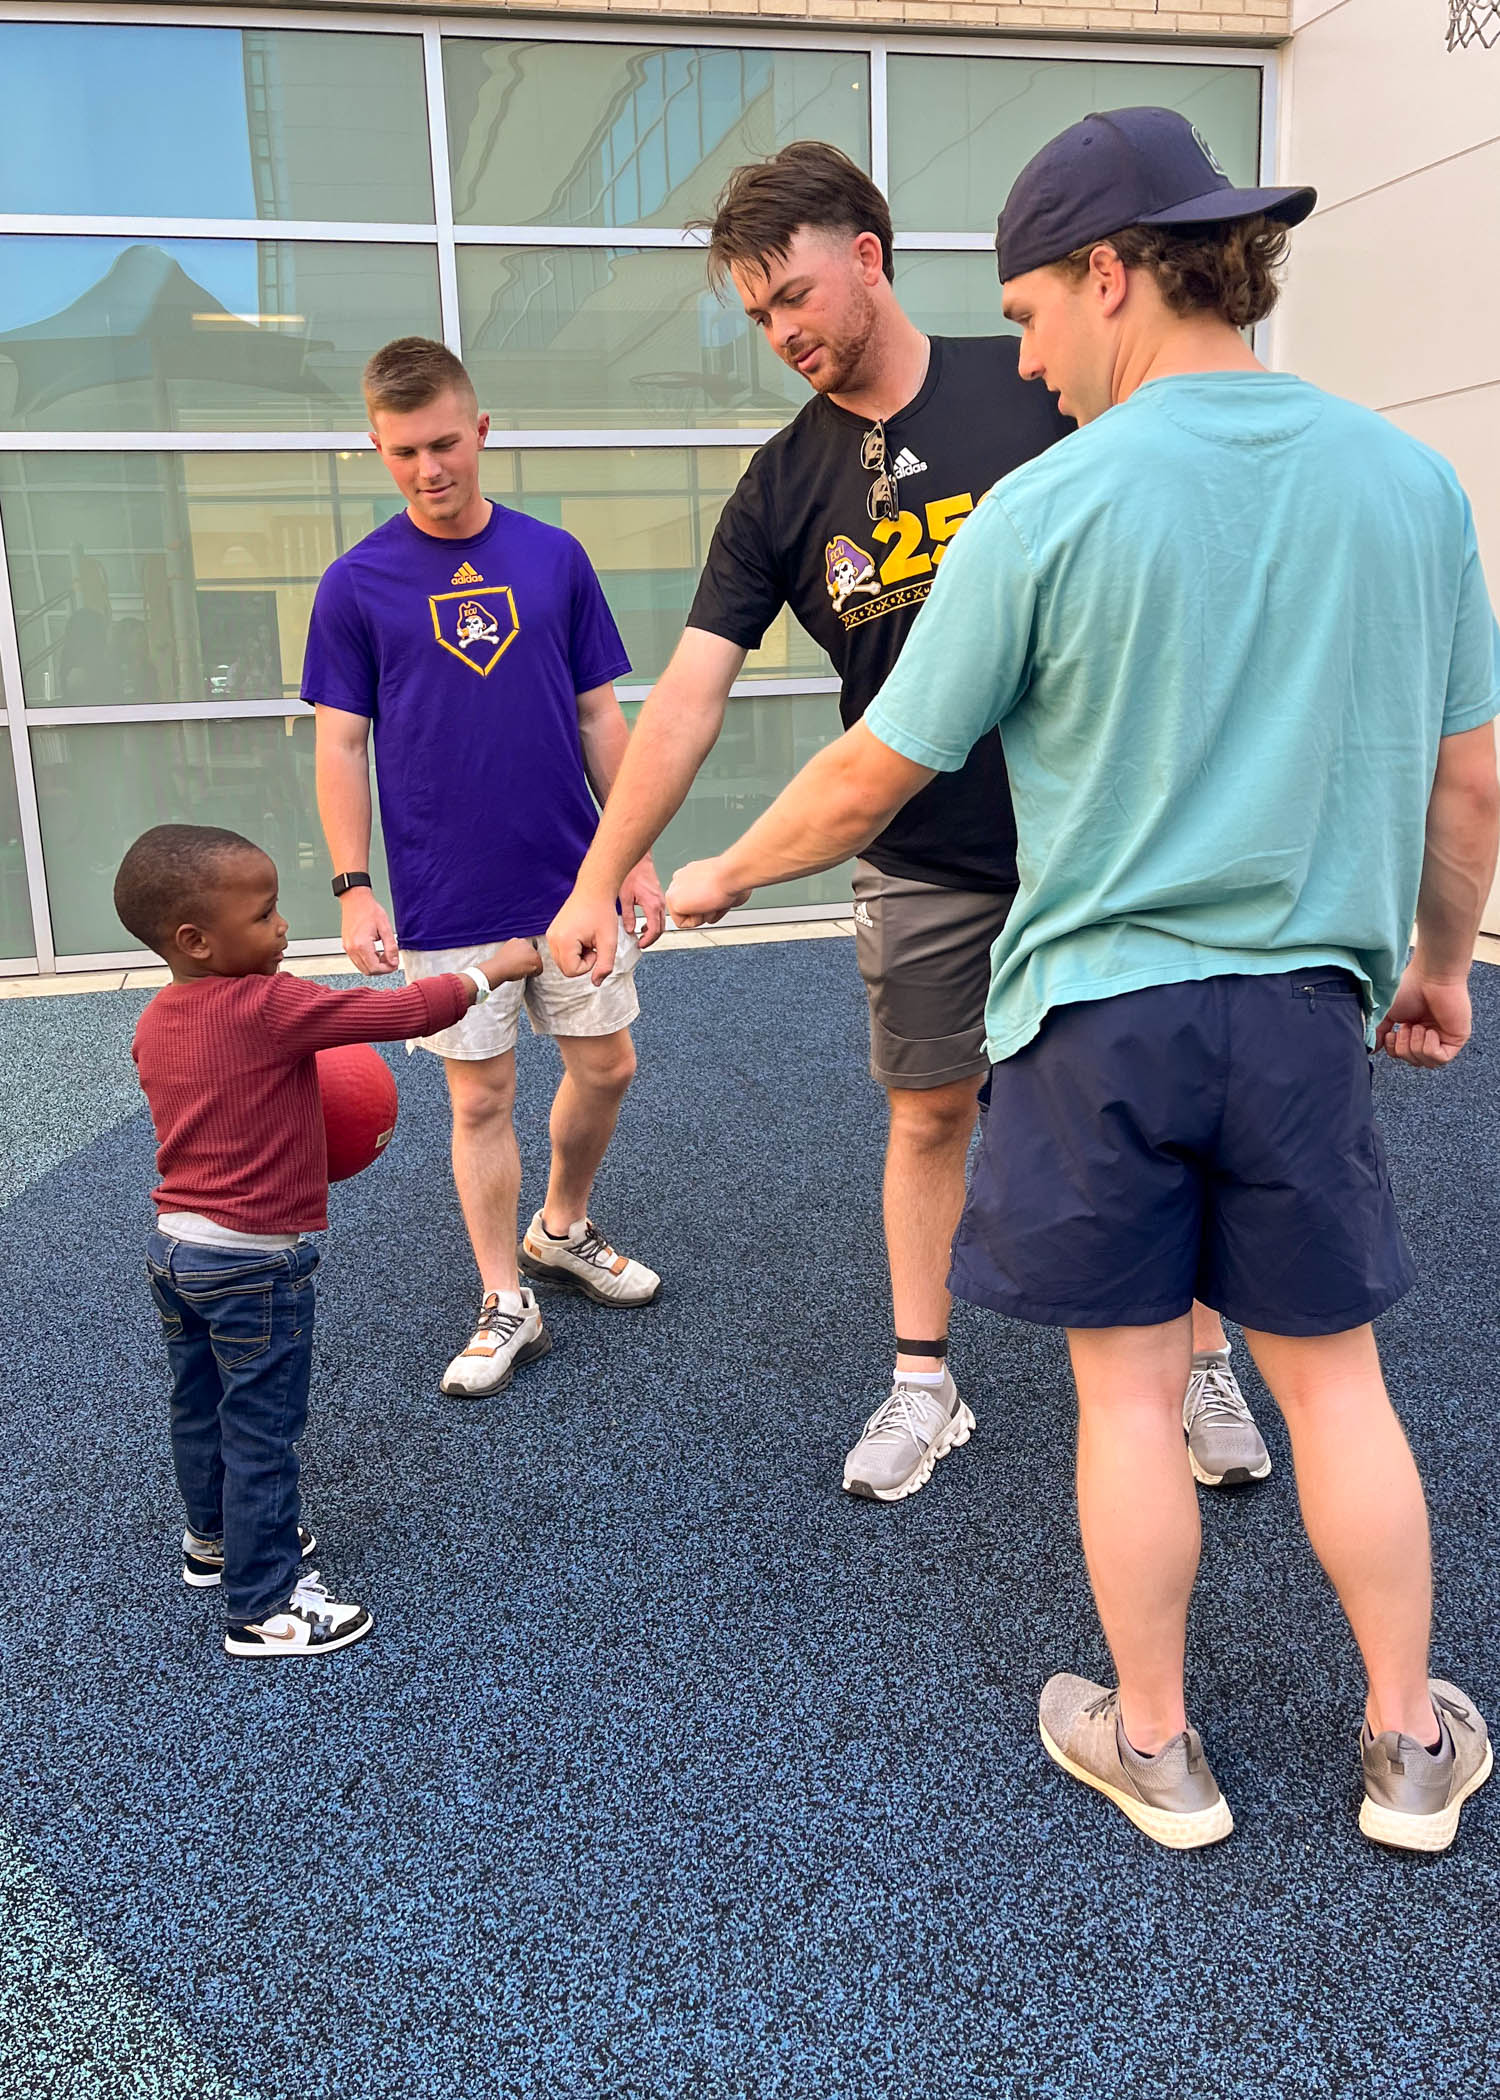 ECU baseball players Joey Berini, Jake Hunter and Nathan Chrismon play with a pediatric patient at the Maynard Children's Hospital playground.